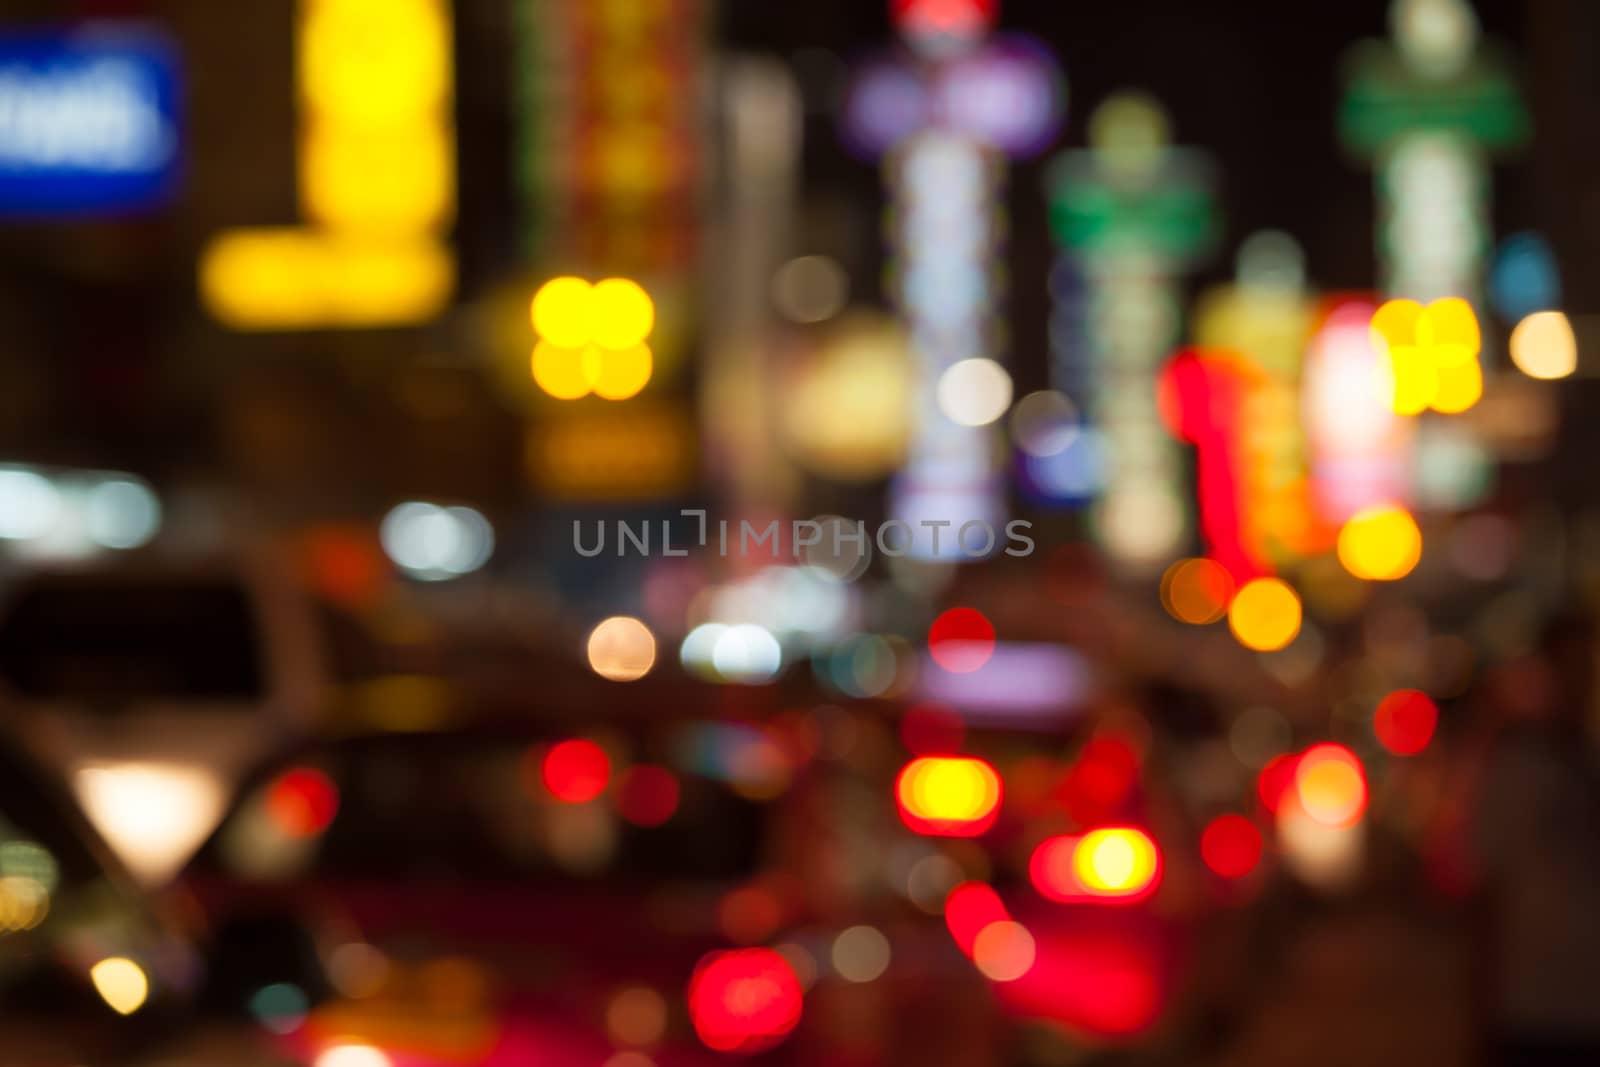 Blurred unfocused city view at night in Thailand